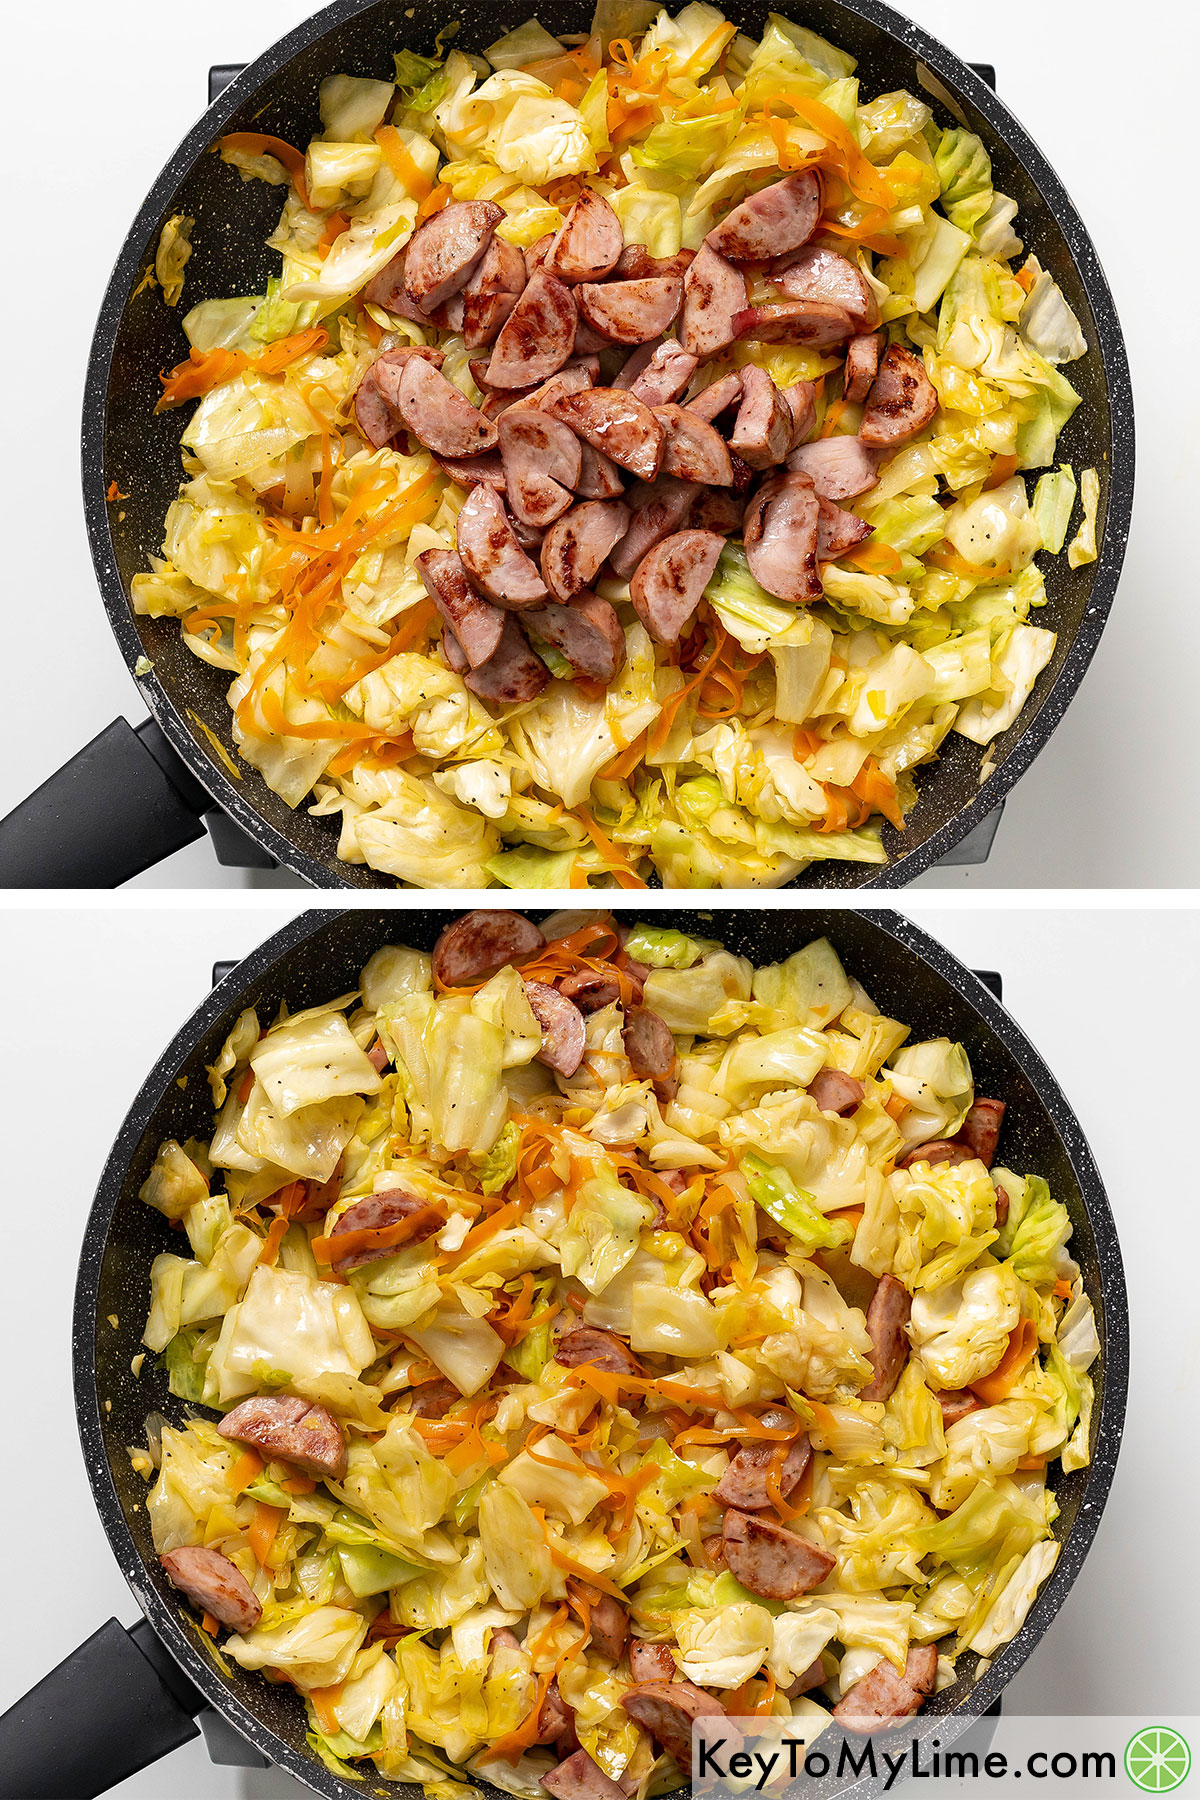 Once cabbage has wilted adding the kielbasa back to the skillet and tossing throughout.